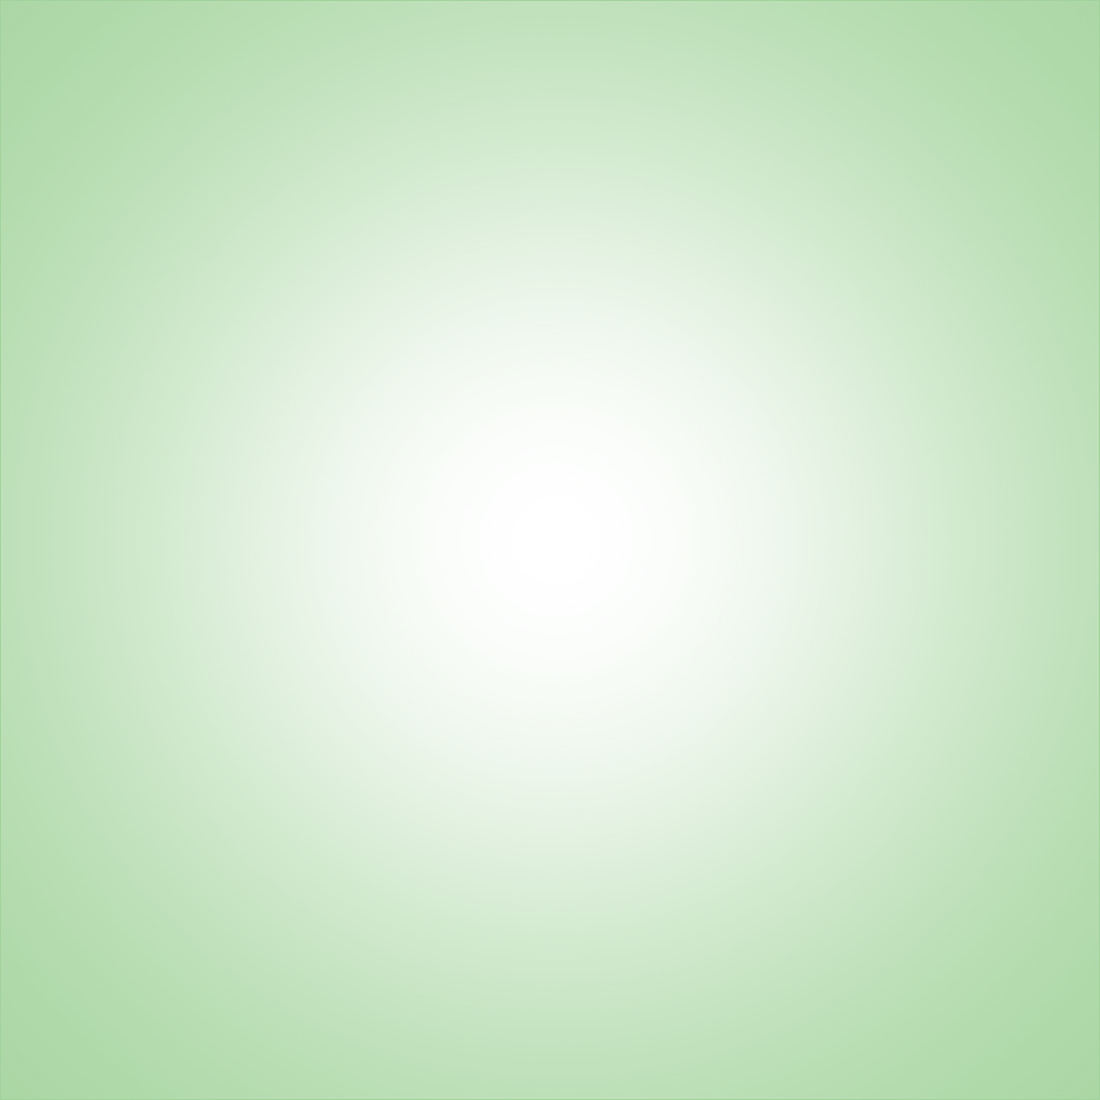 Light green background with a white center.